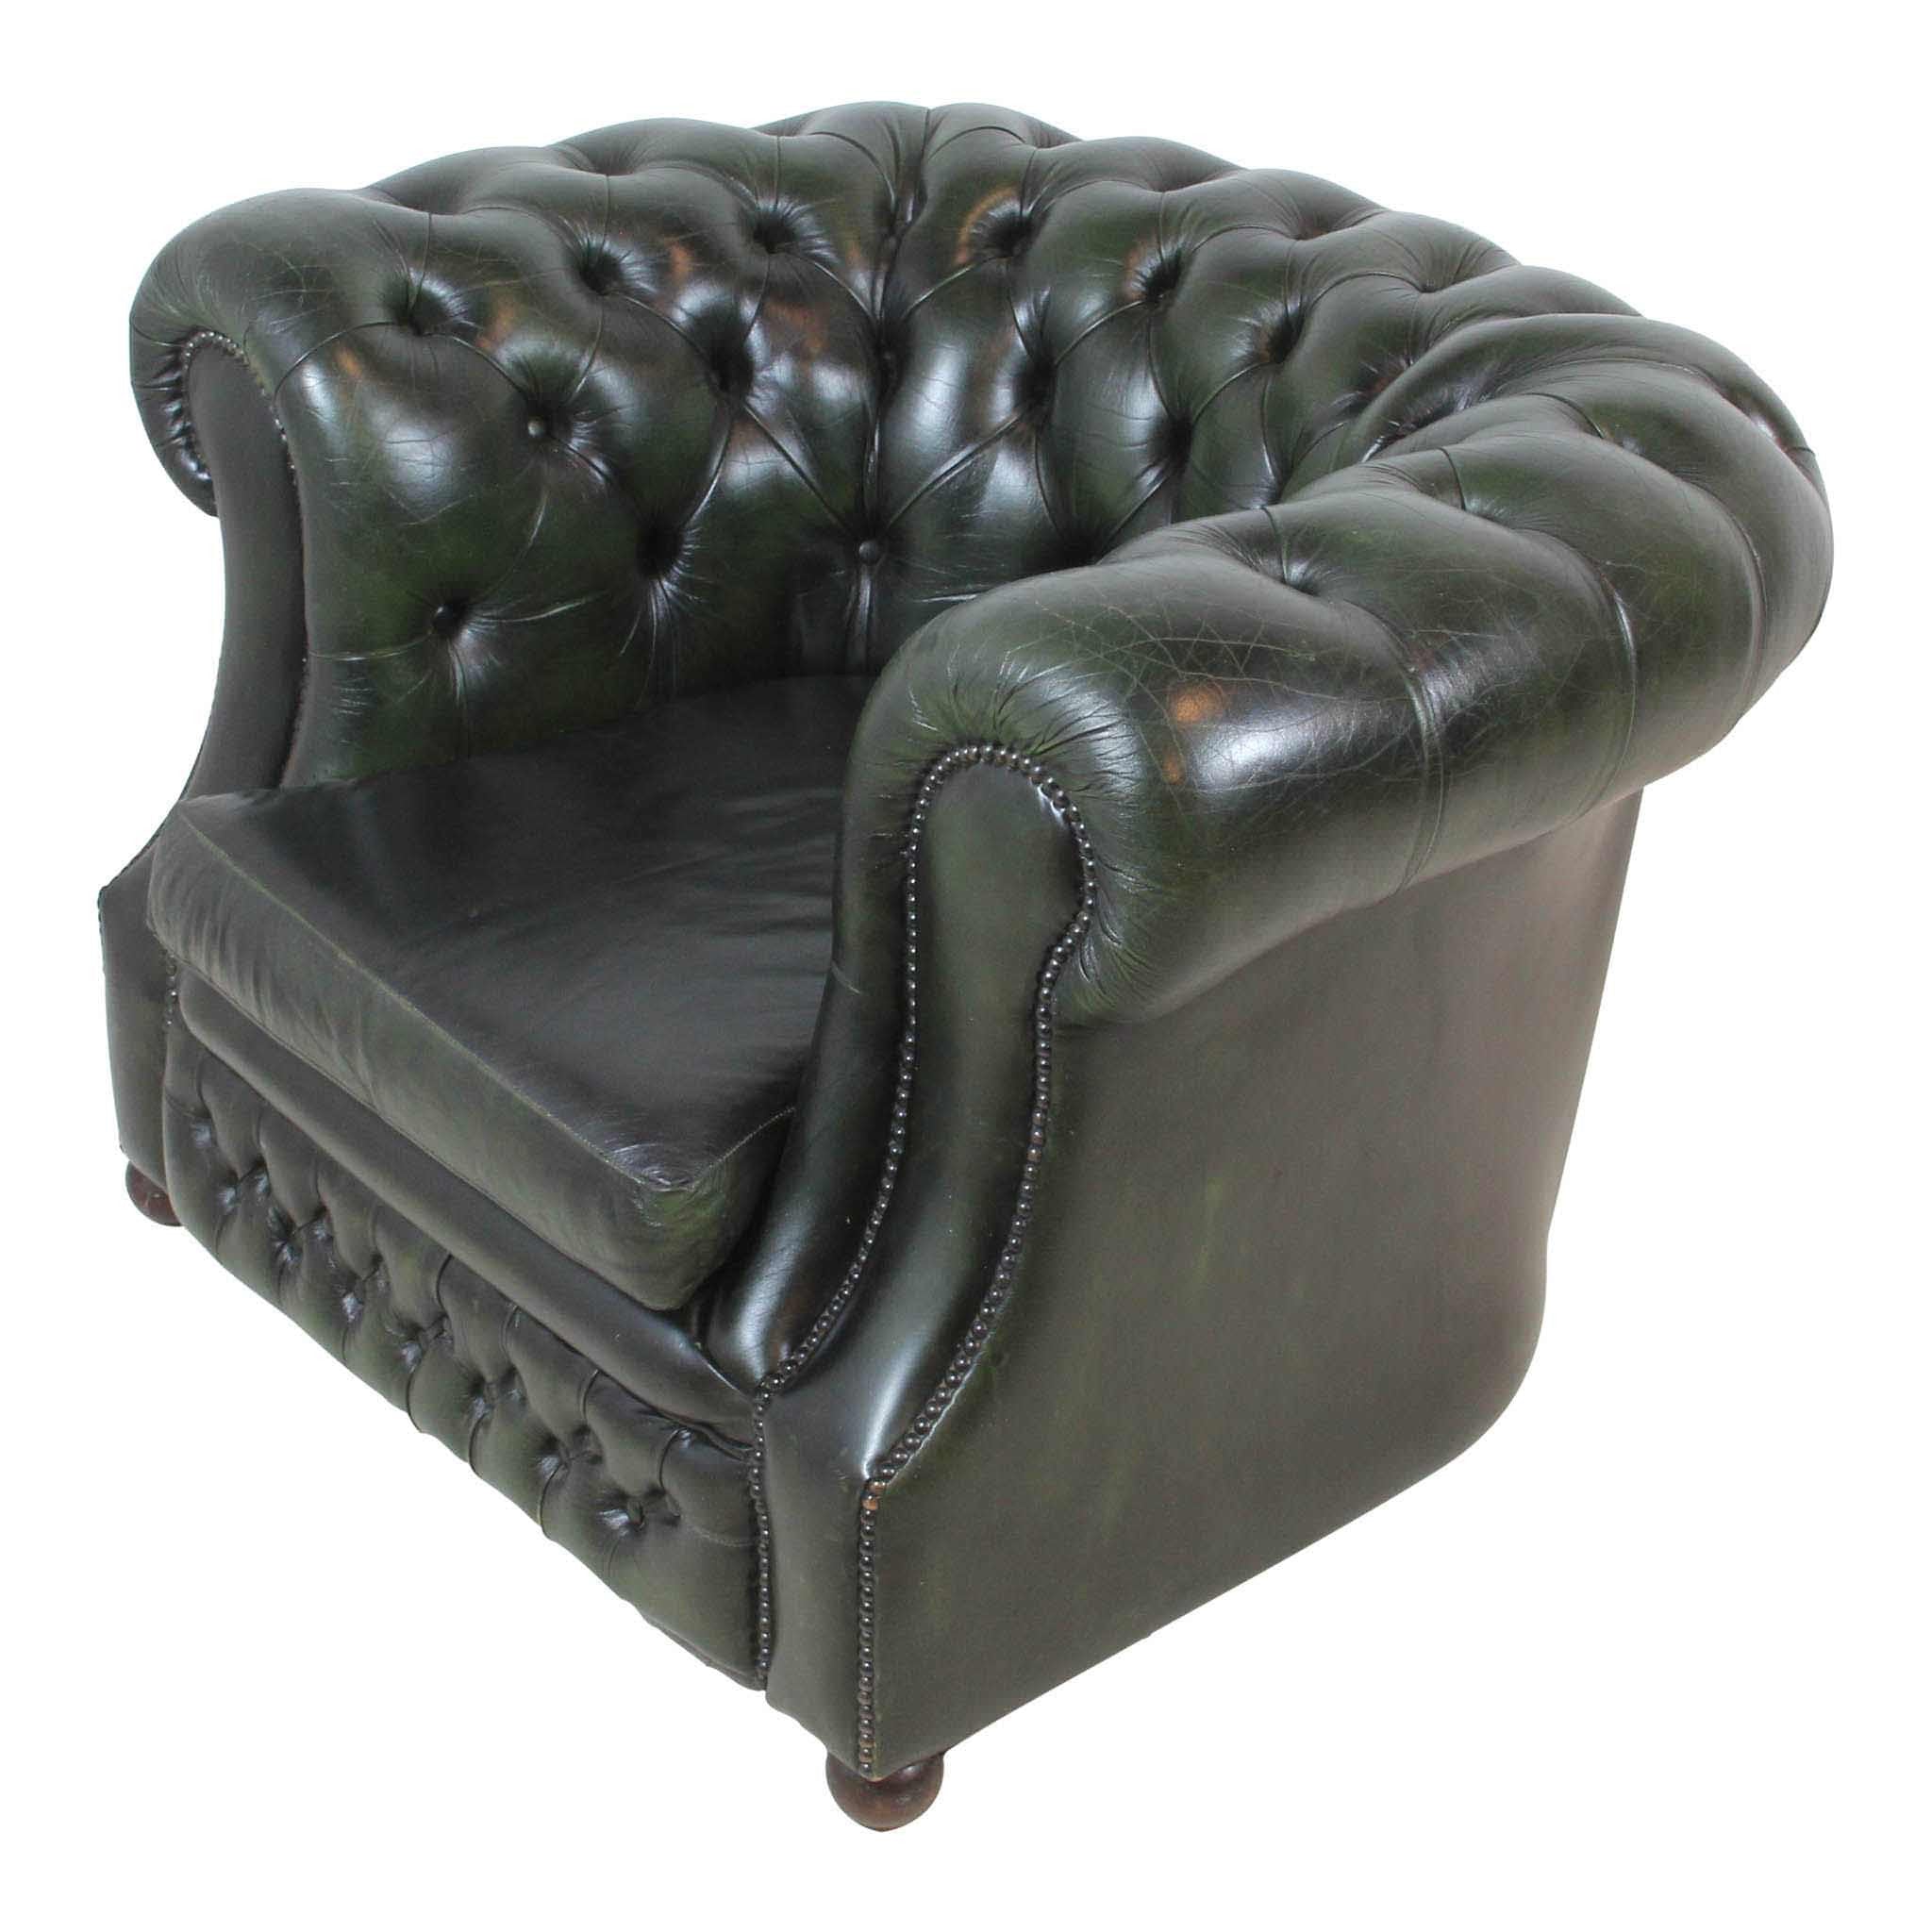 English Chesterfield